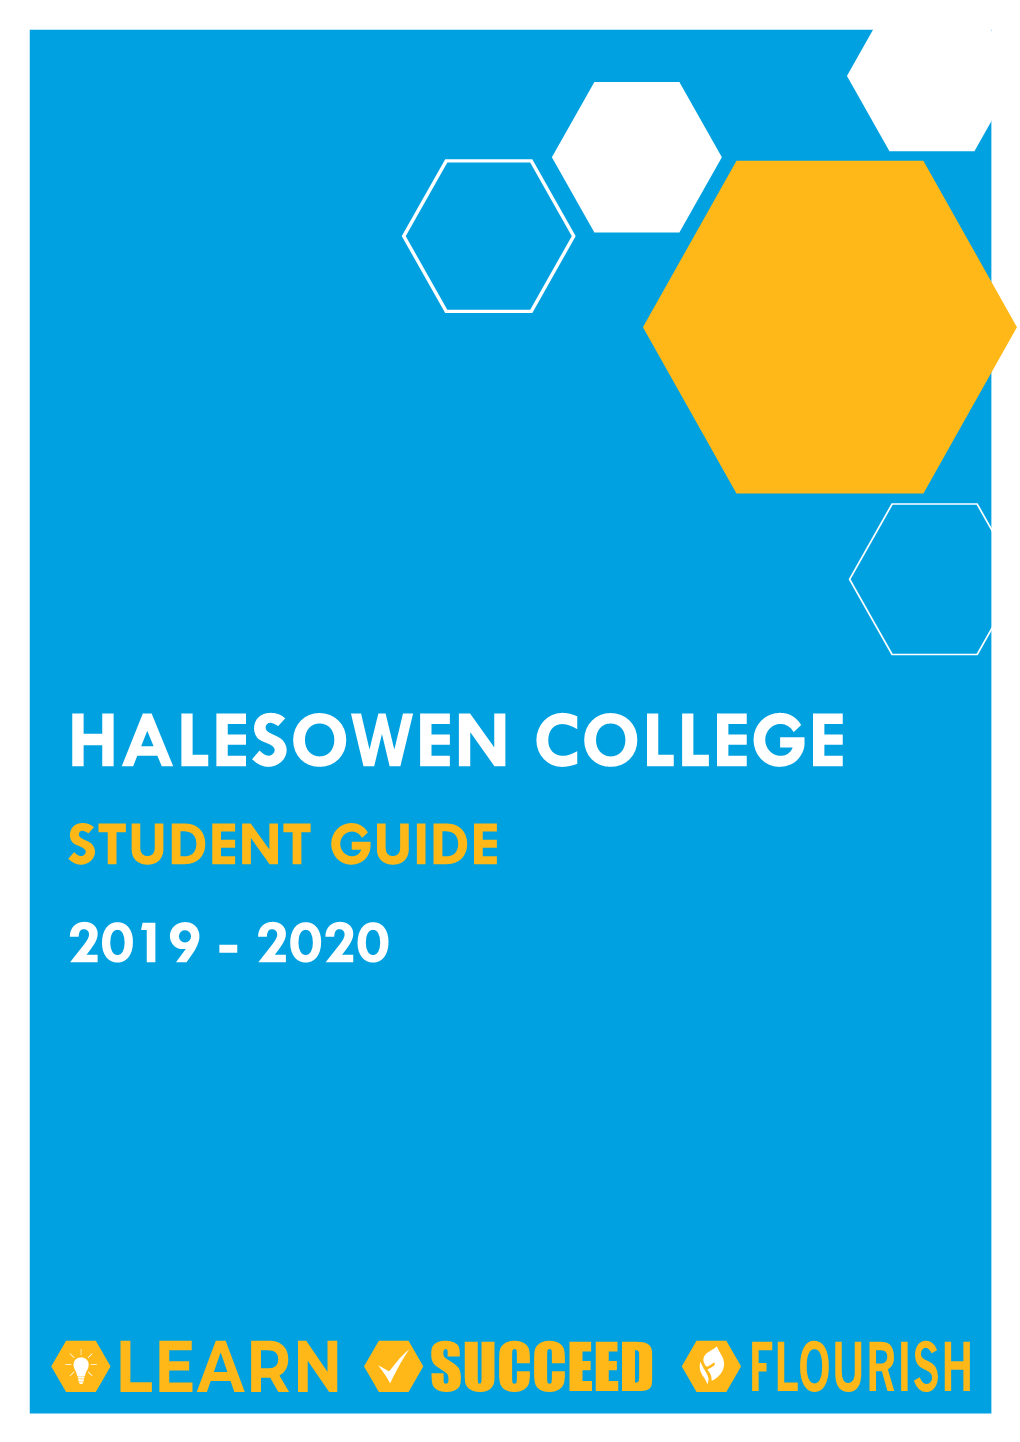 Student Guide 2019 - 2020 Welcome